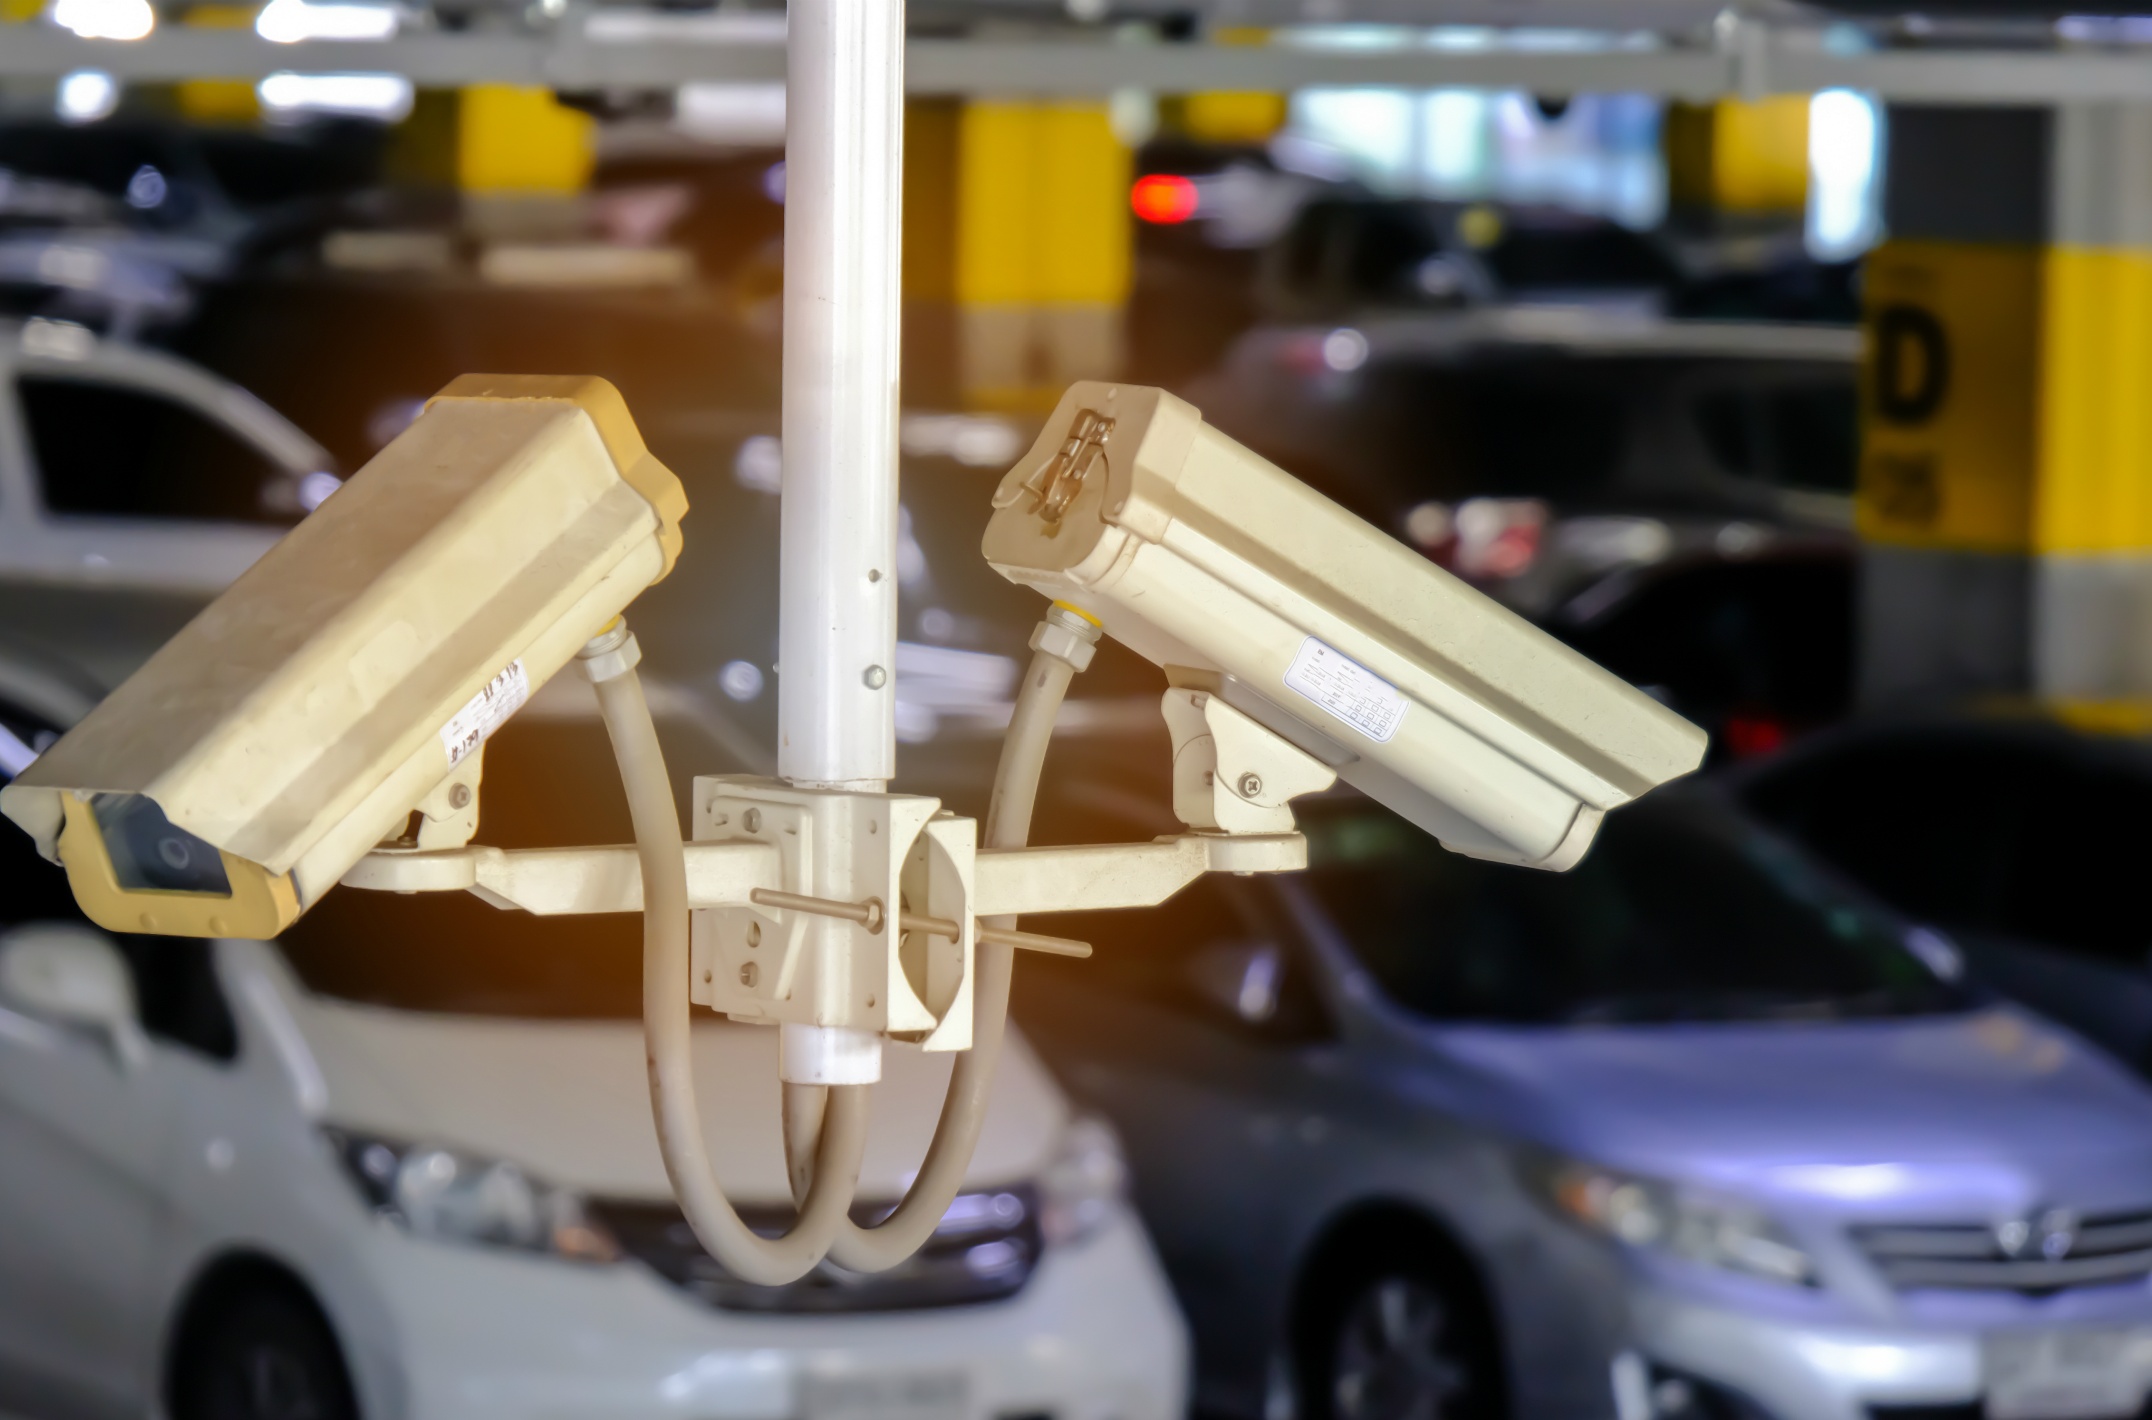 2-cctv-close-circuit-television-are-monitor-record-cars-parking-lot-shopping-mall